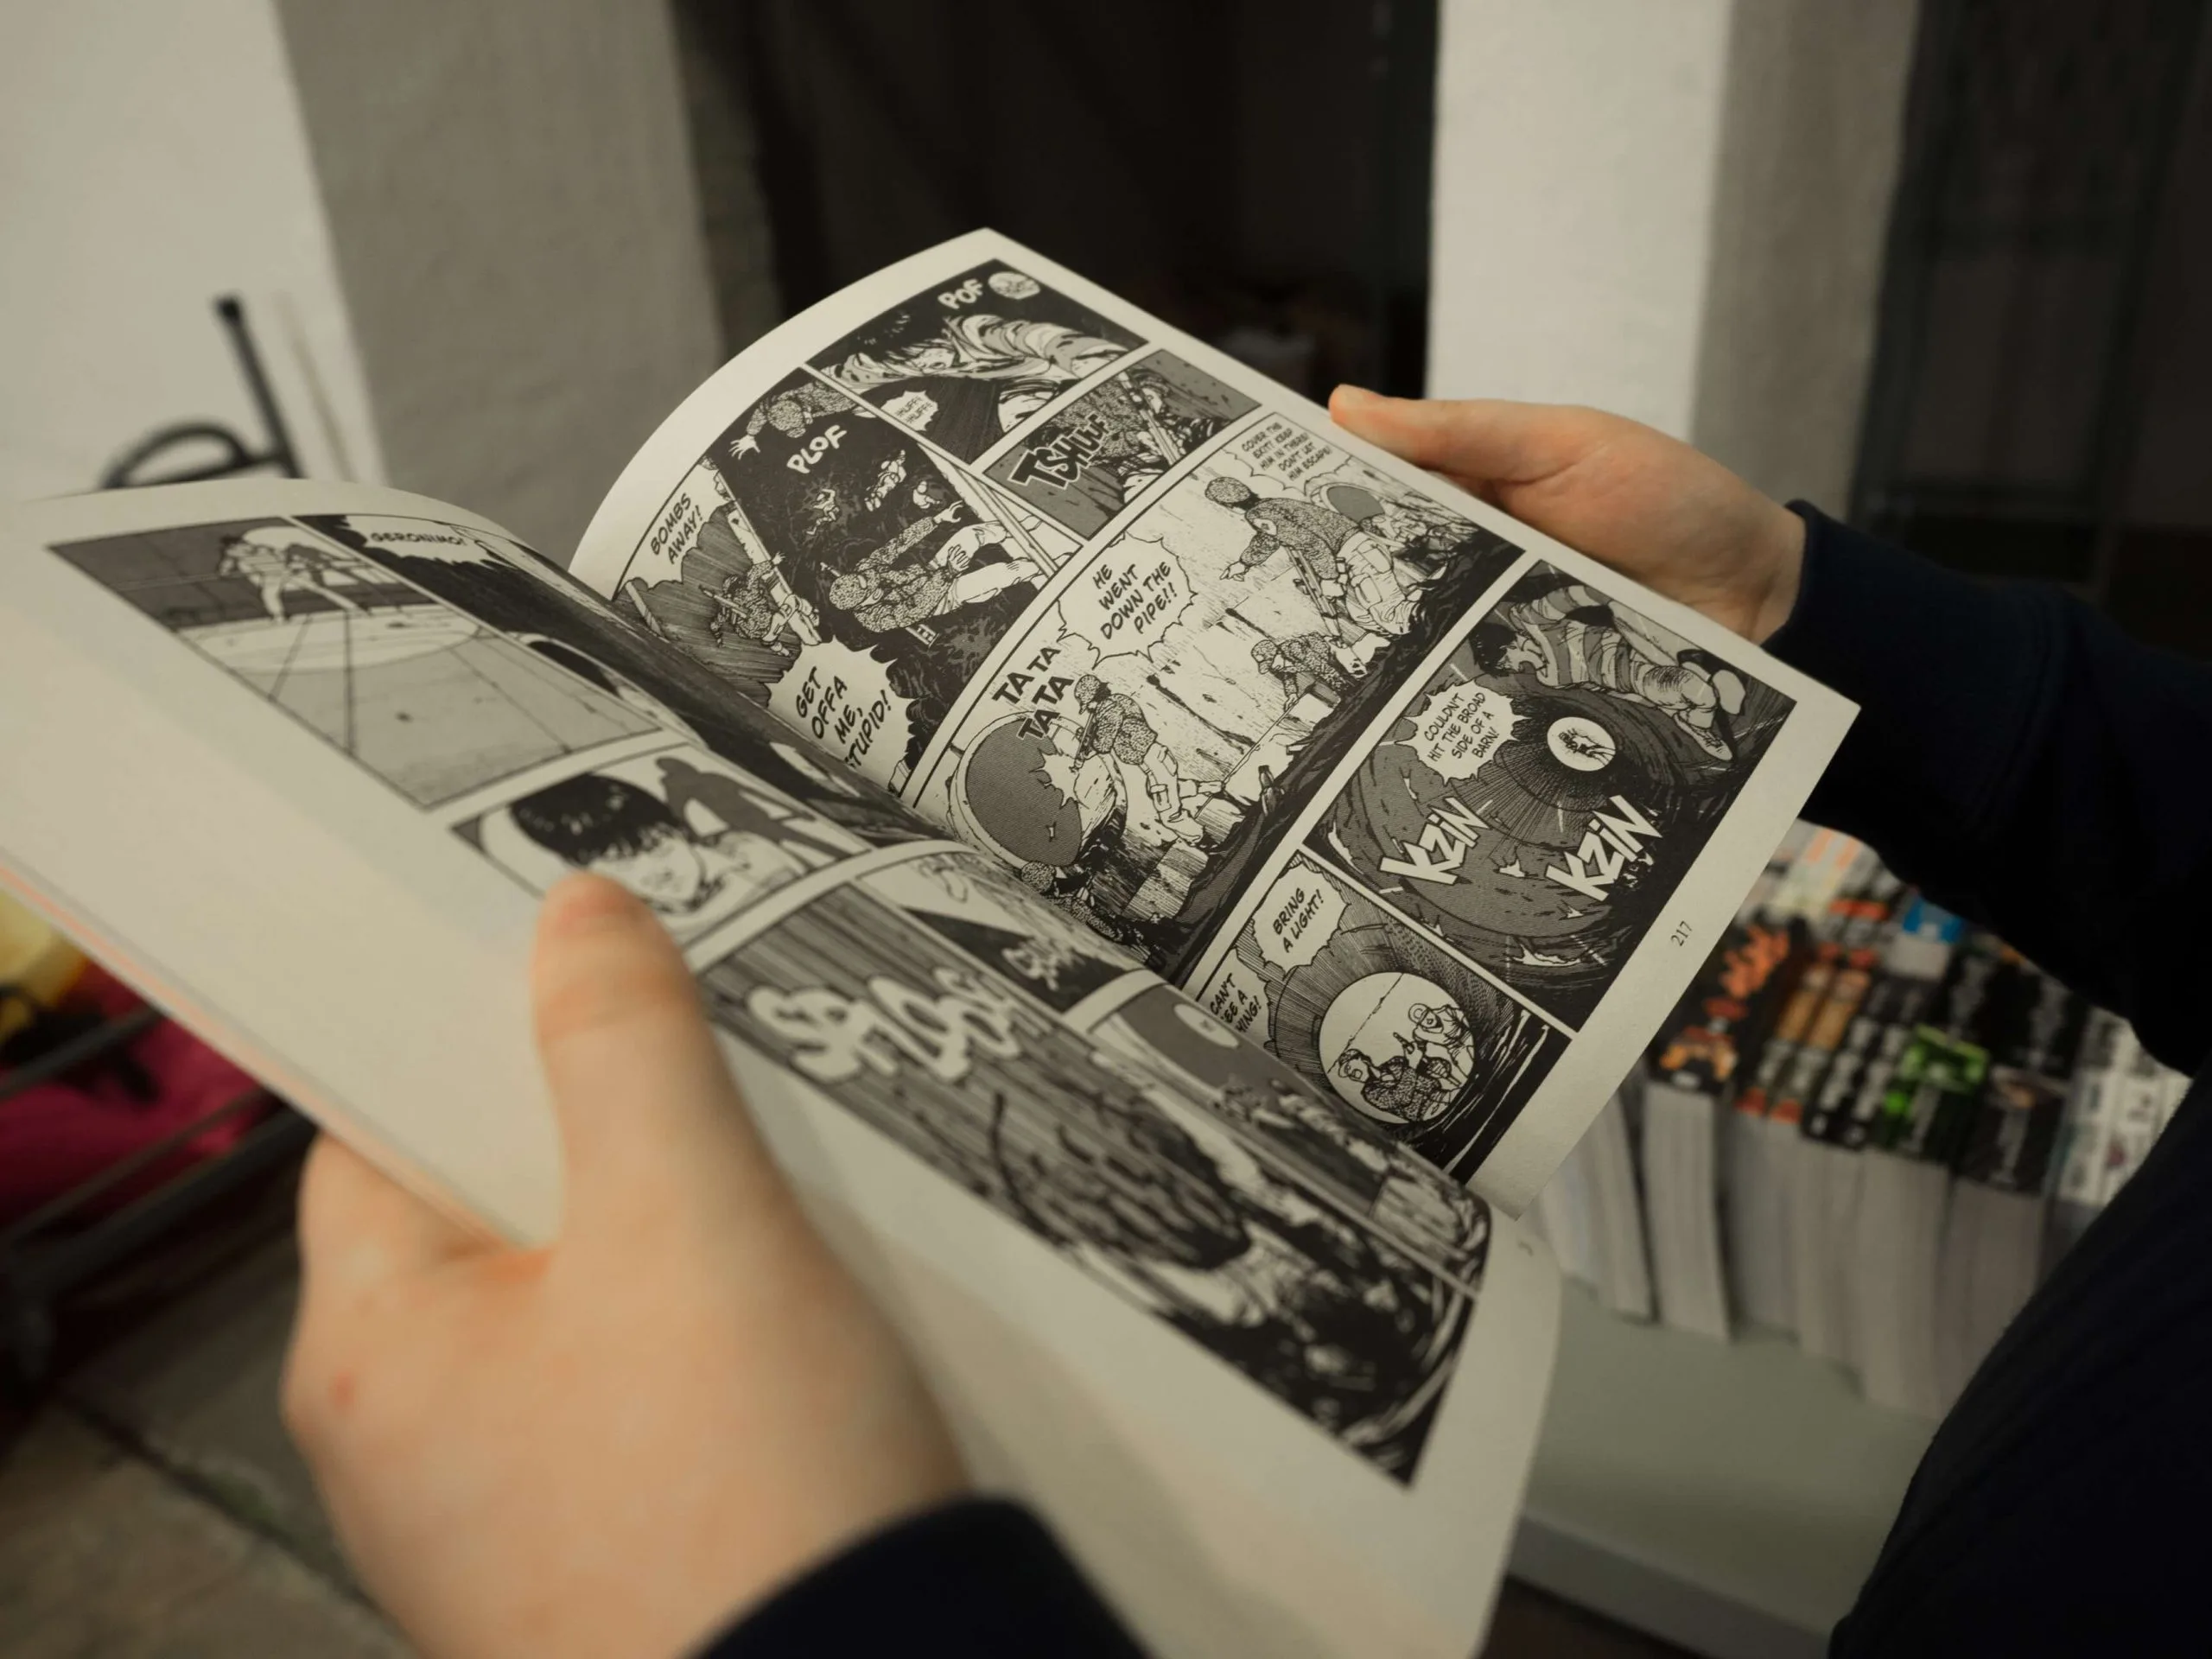 An Image of a person reading Manga